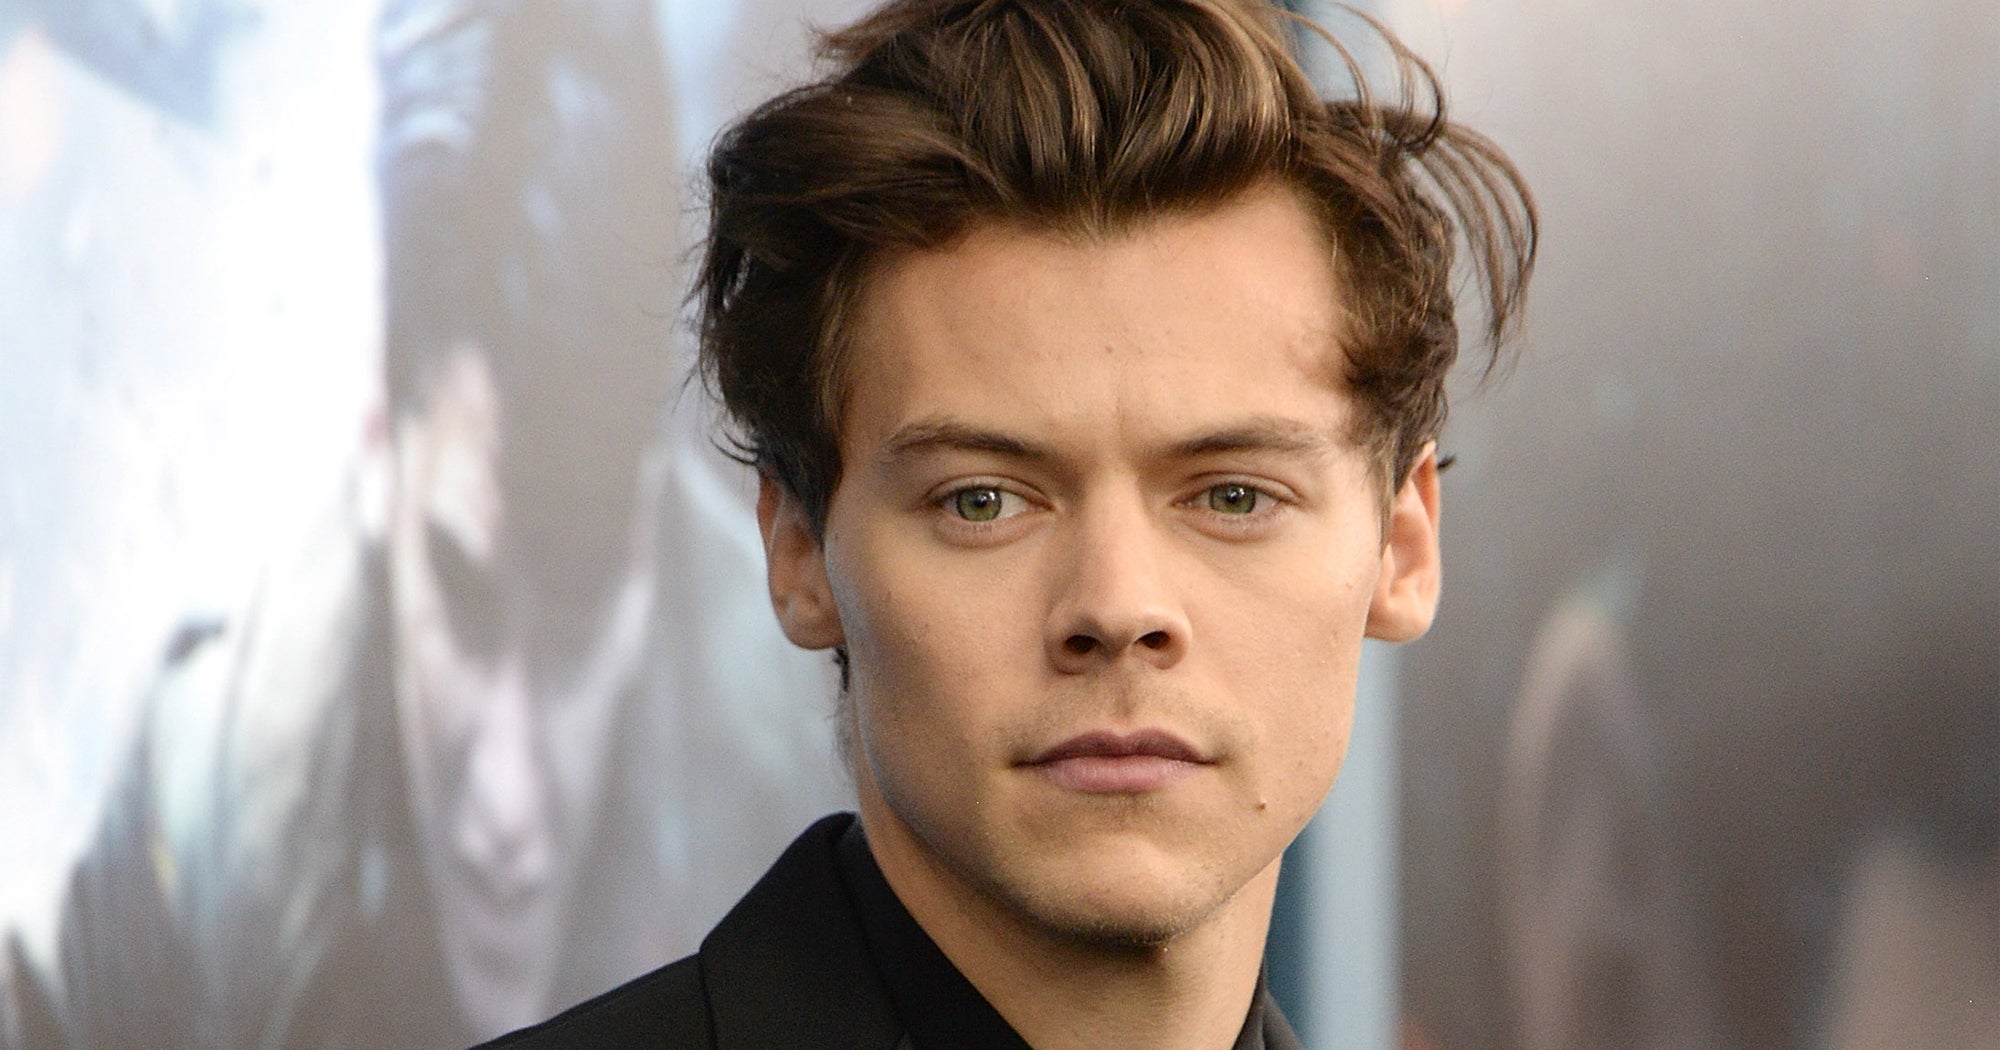 Harry Styles' new haircut is a call back to another era